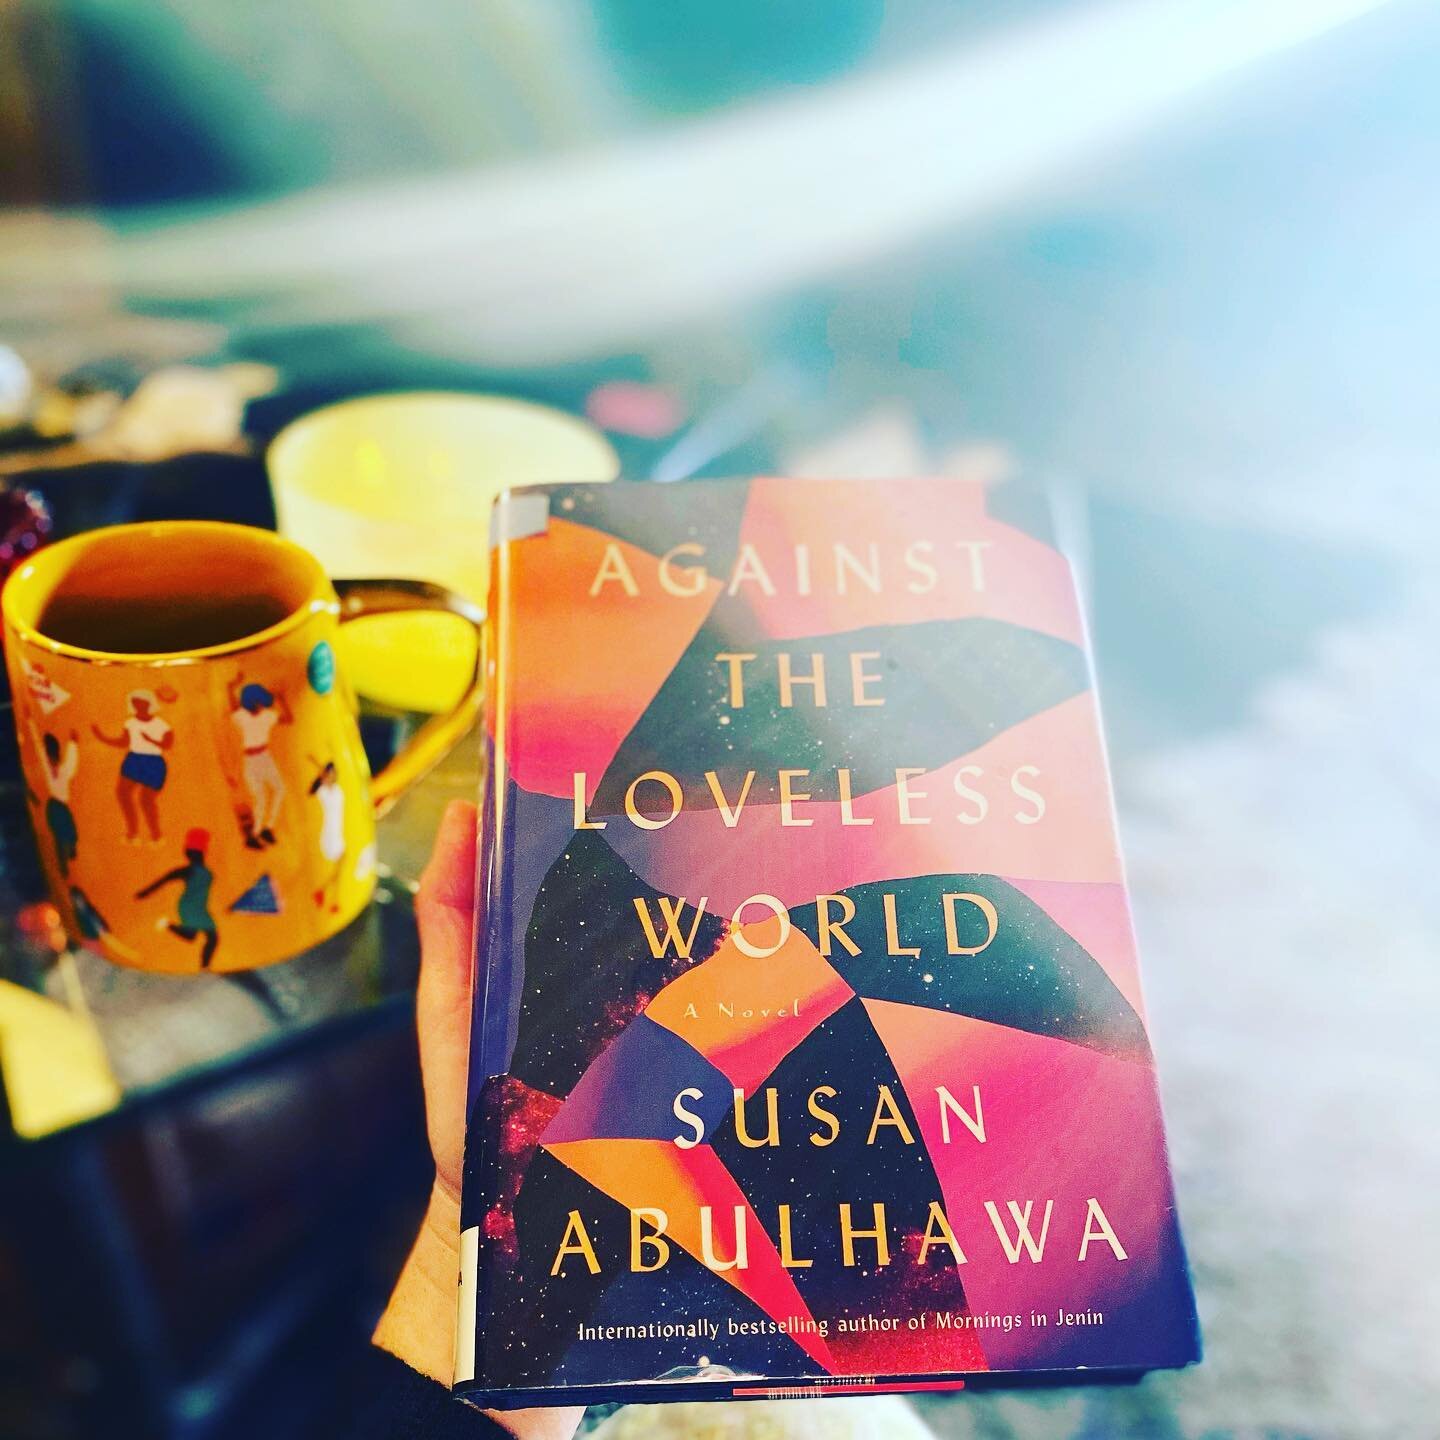 Some mornings I finish a book and I wonder how I am ever gonna make it to work. That happened today thanks to @susanabulhawa 😅👀
&mdash;
Craft takeaways for this Jewish woman on this novel from a Palestinian + female POV: Sometimes you have to write